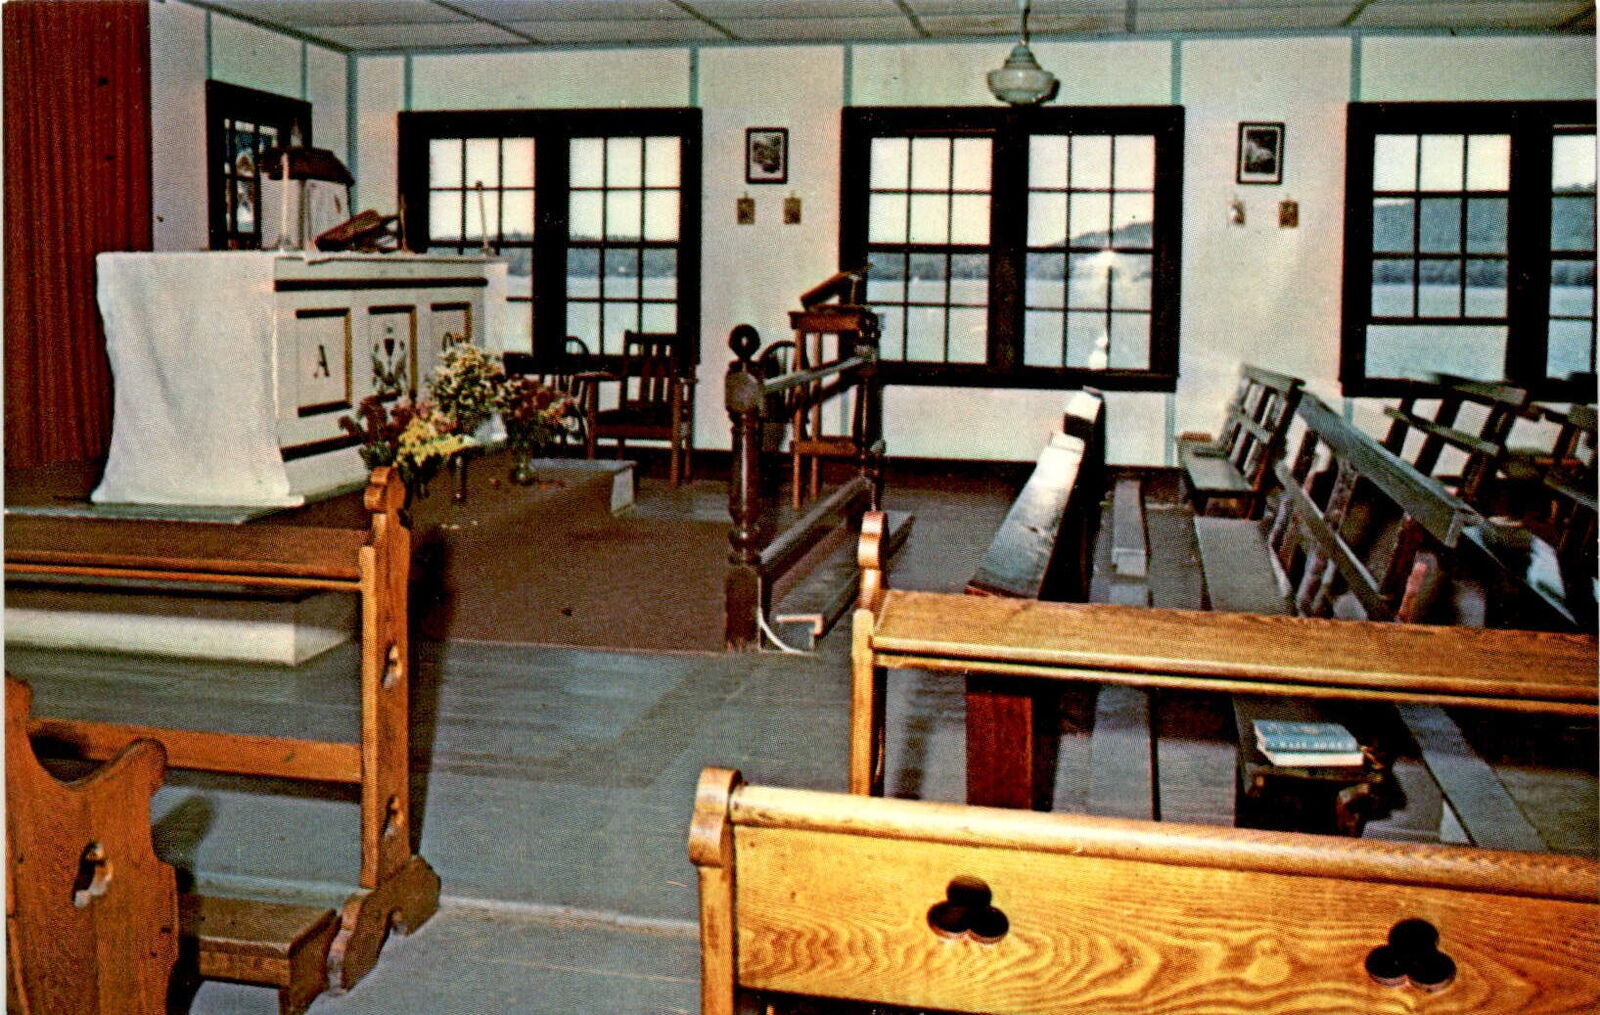 Camp Notre Dame: Boys' Camp in Spofford, NH